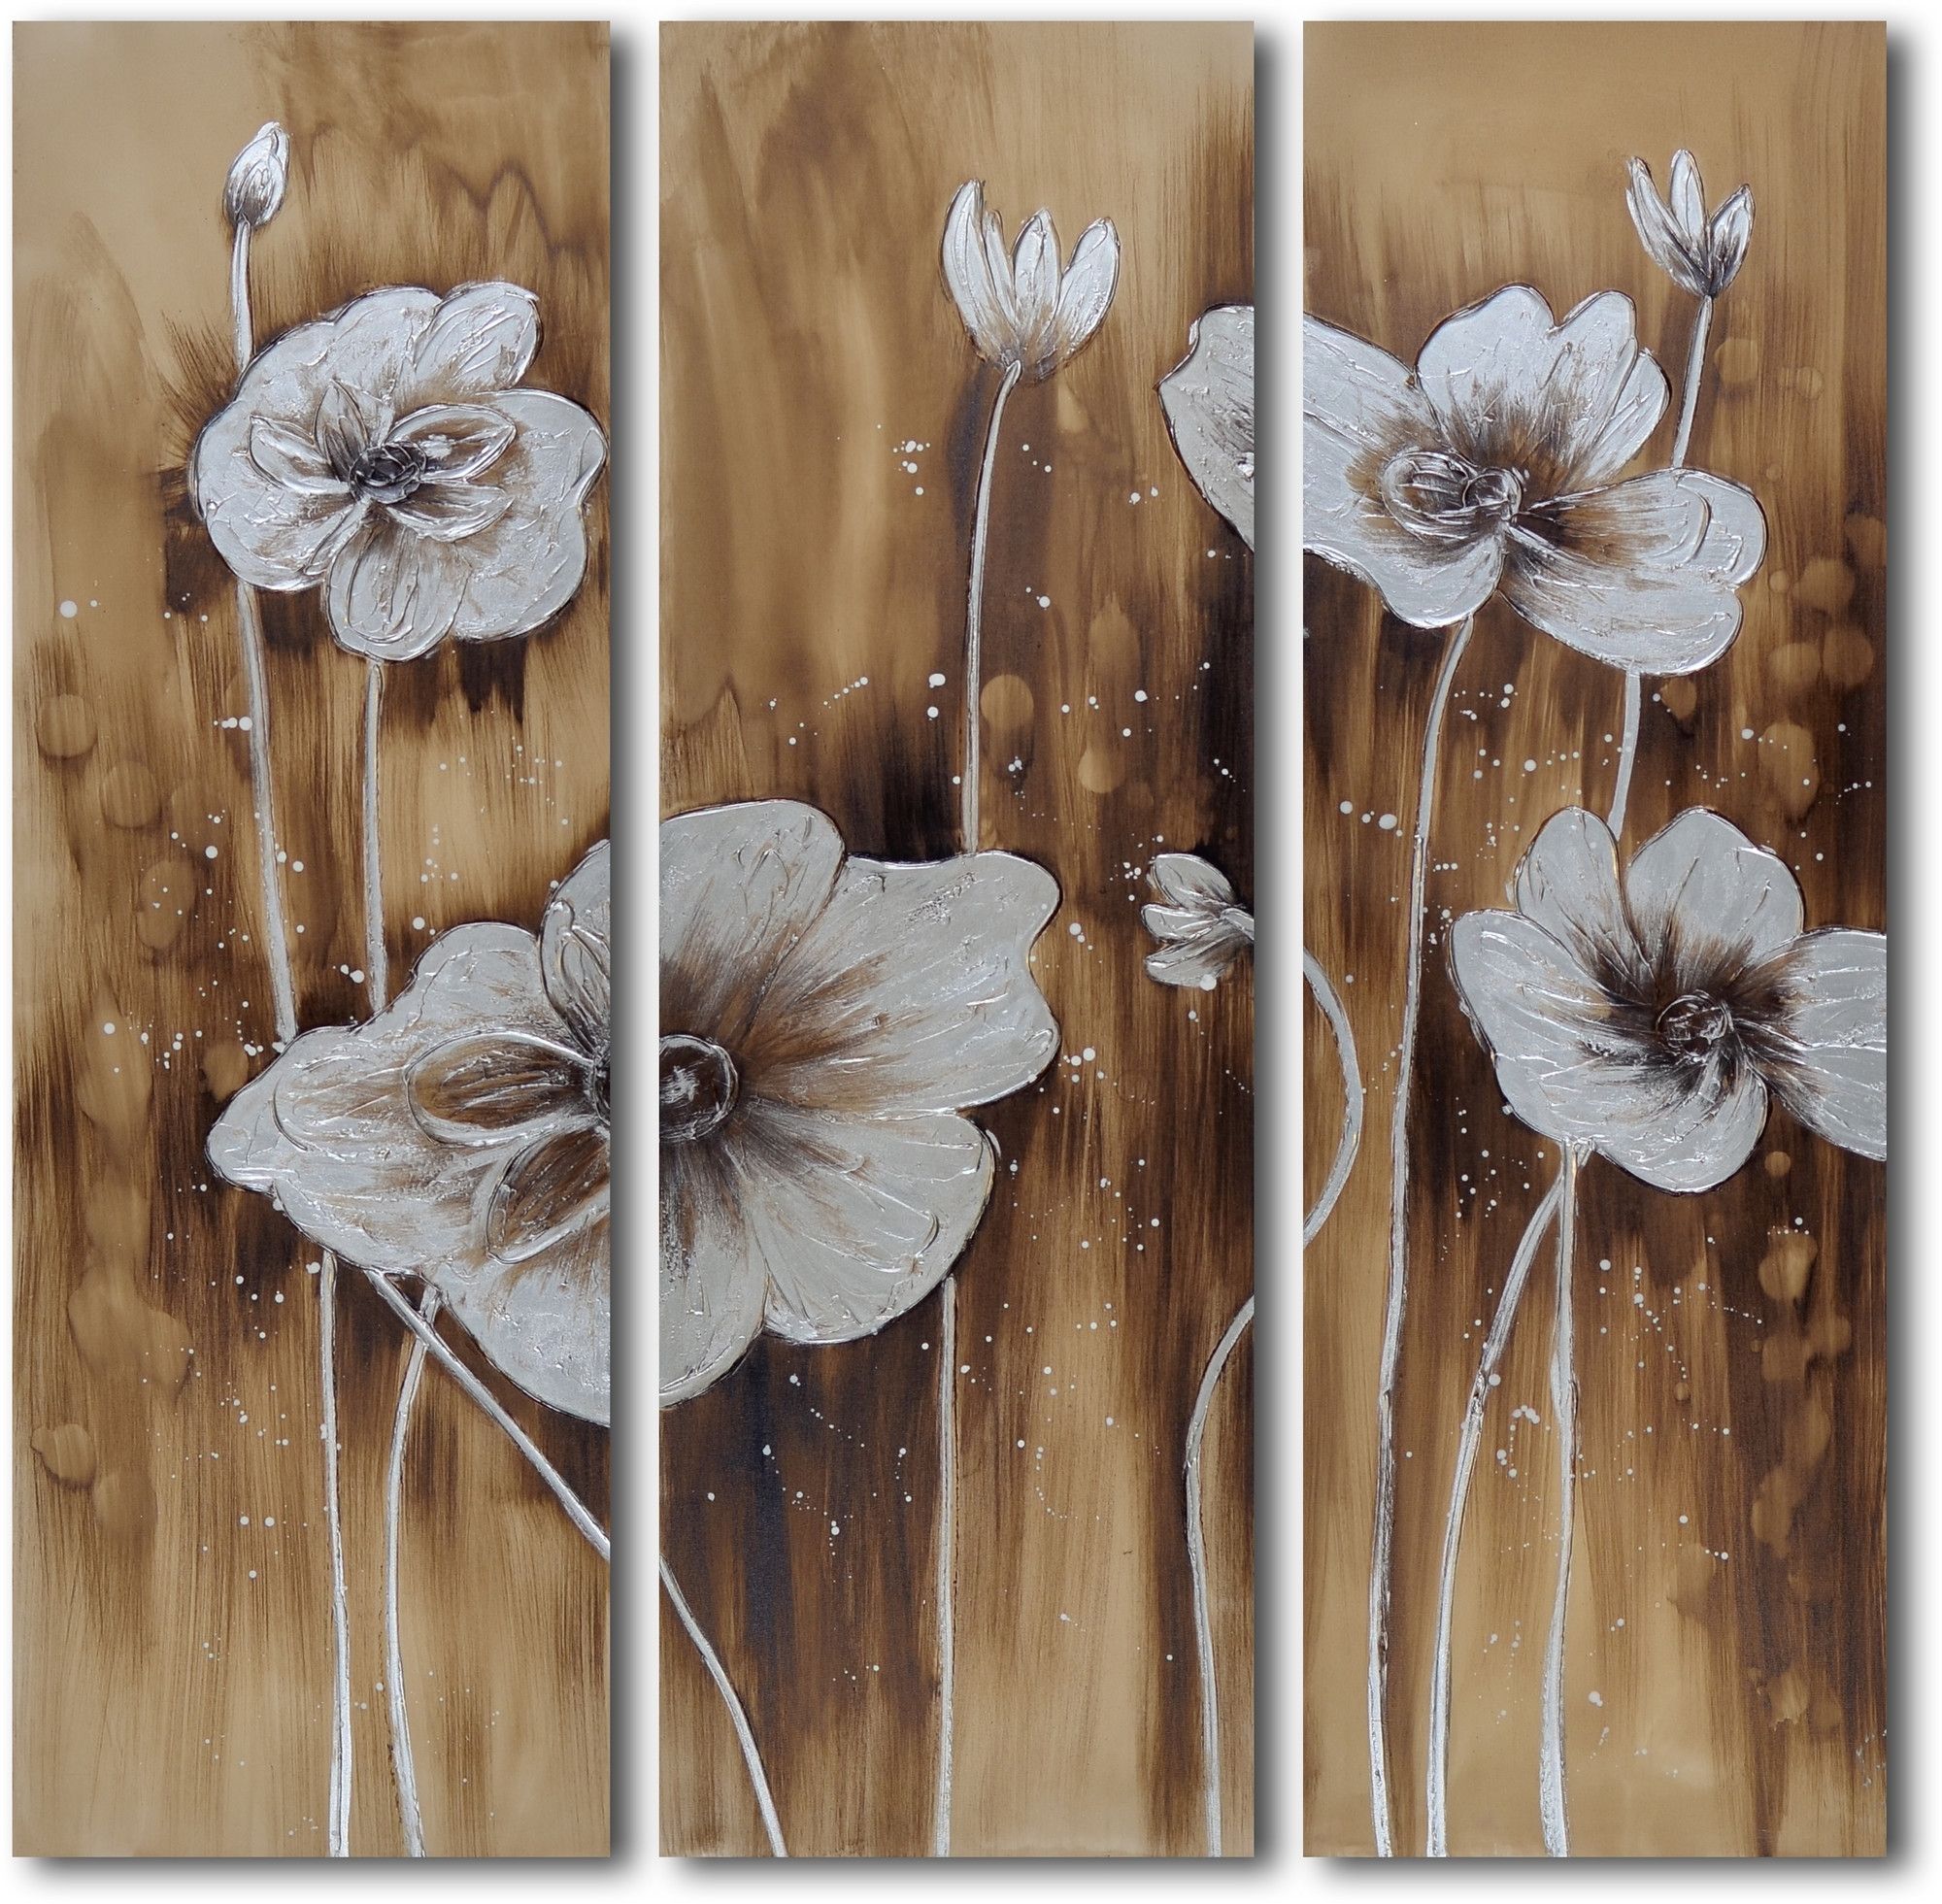 3 Piece Floral Canvas Wall Art Within Widely Used My Art Outlet 'muddied Floral March' 3 Piece Original Painting On (View 12 of 15)